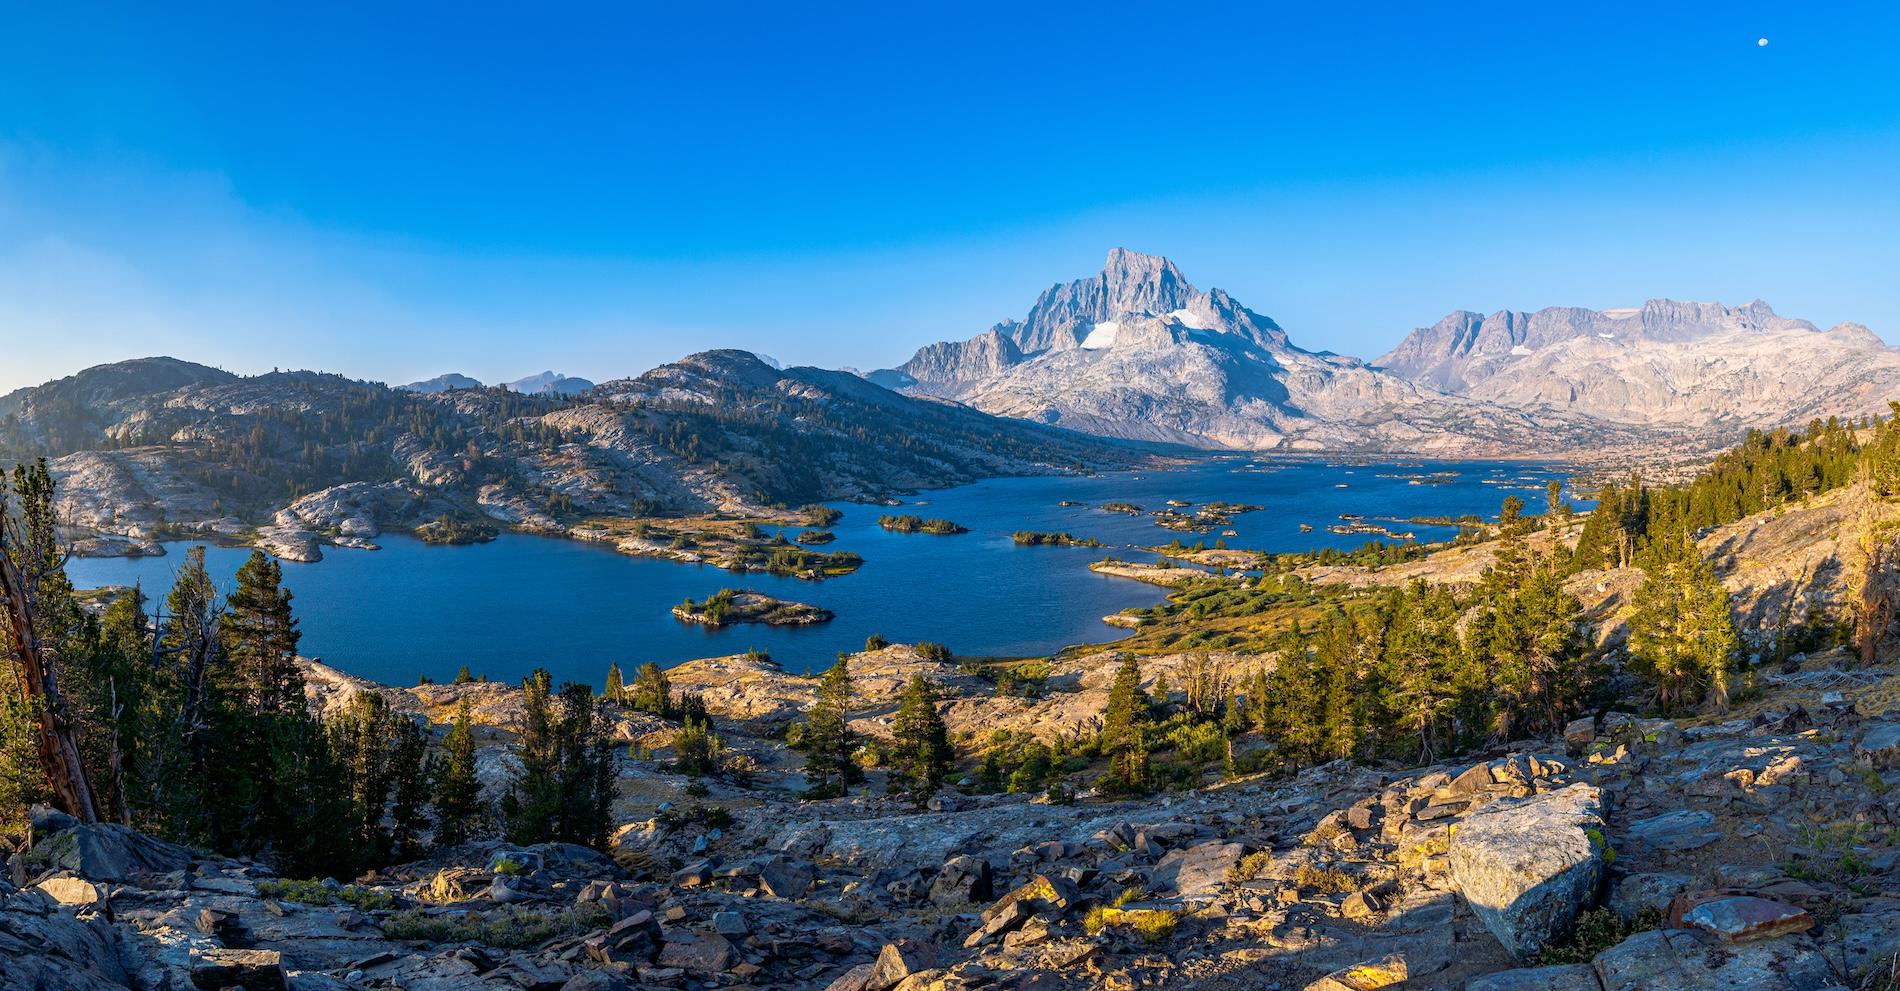 Panoramic view of Thousand Island Island Lake in the Sierras. Photo by Brock Dallman